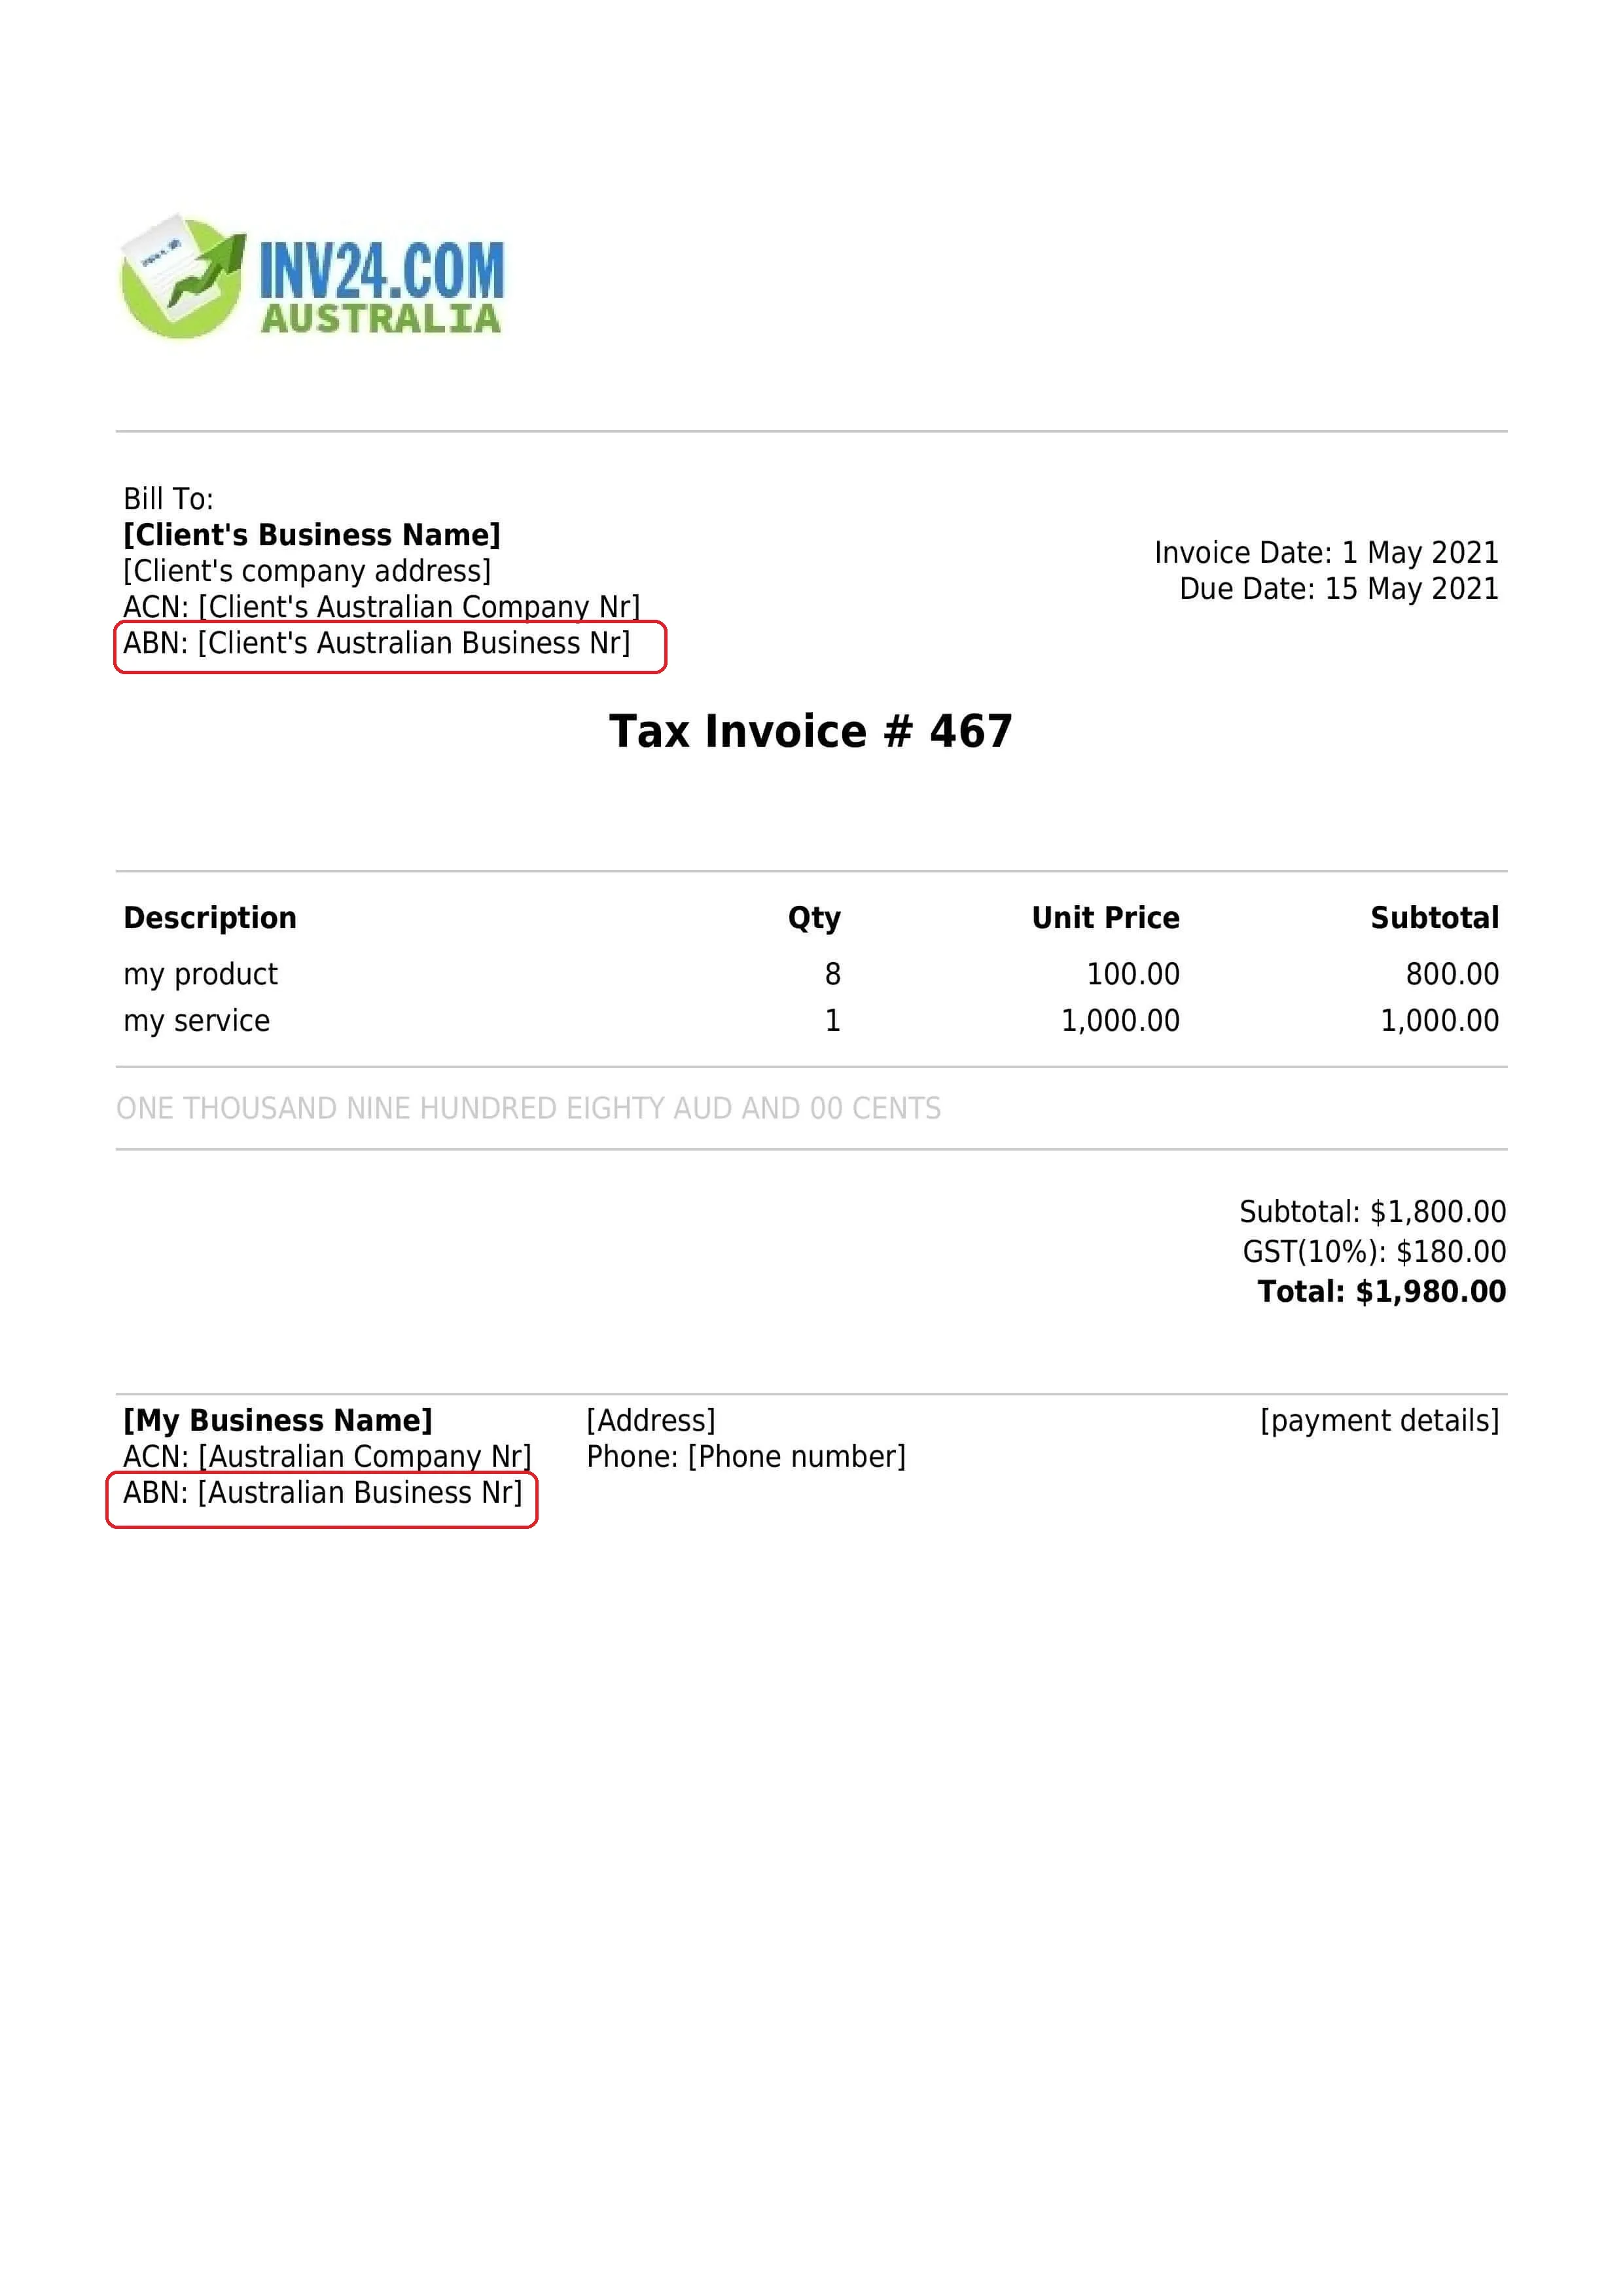 Australian Business Number (ABN) on the invoice